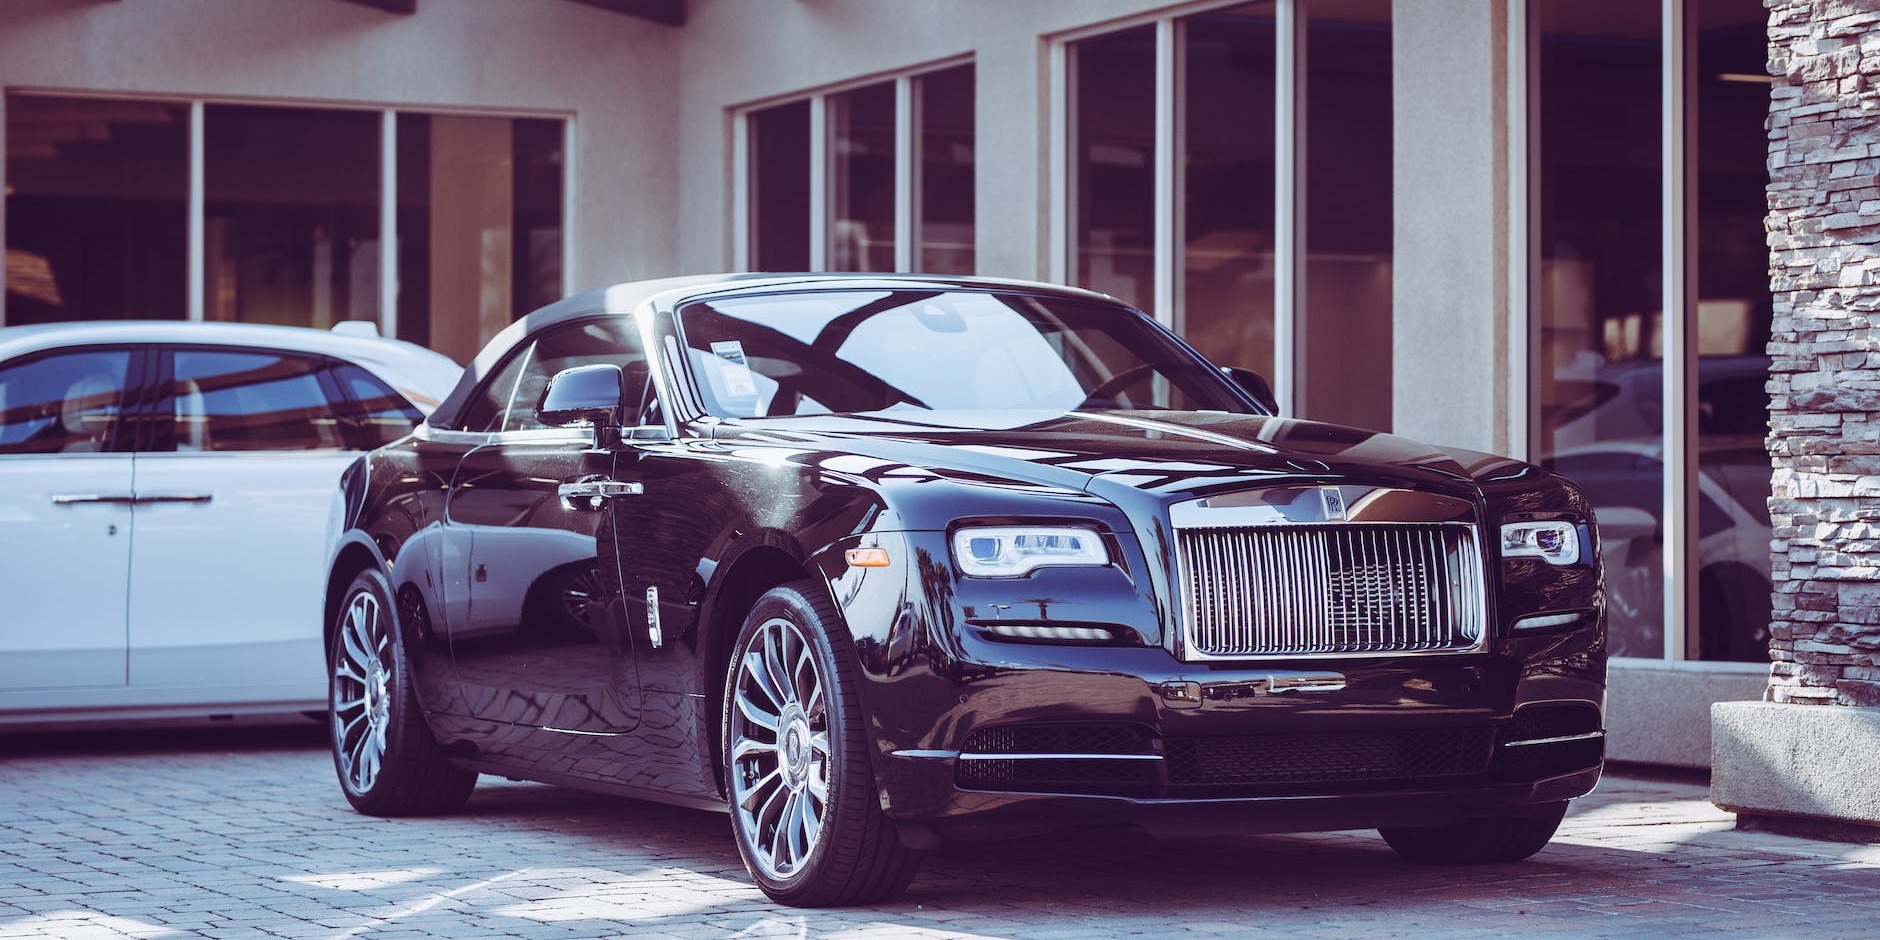 Experience Opulence with Rolls Royce Limo Hire in London